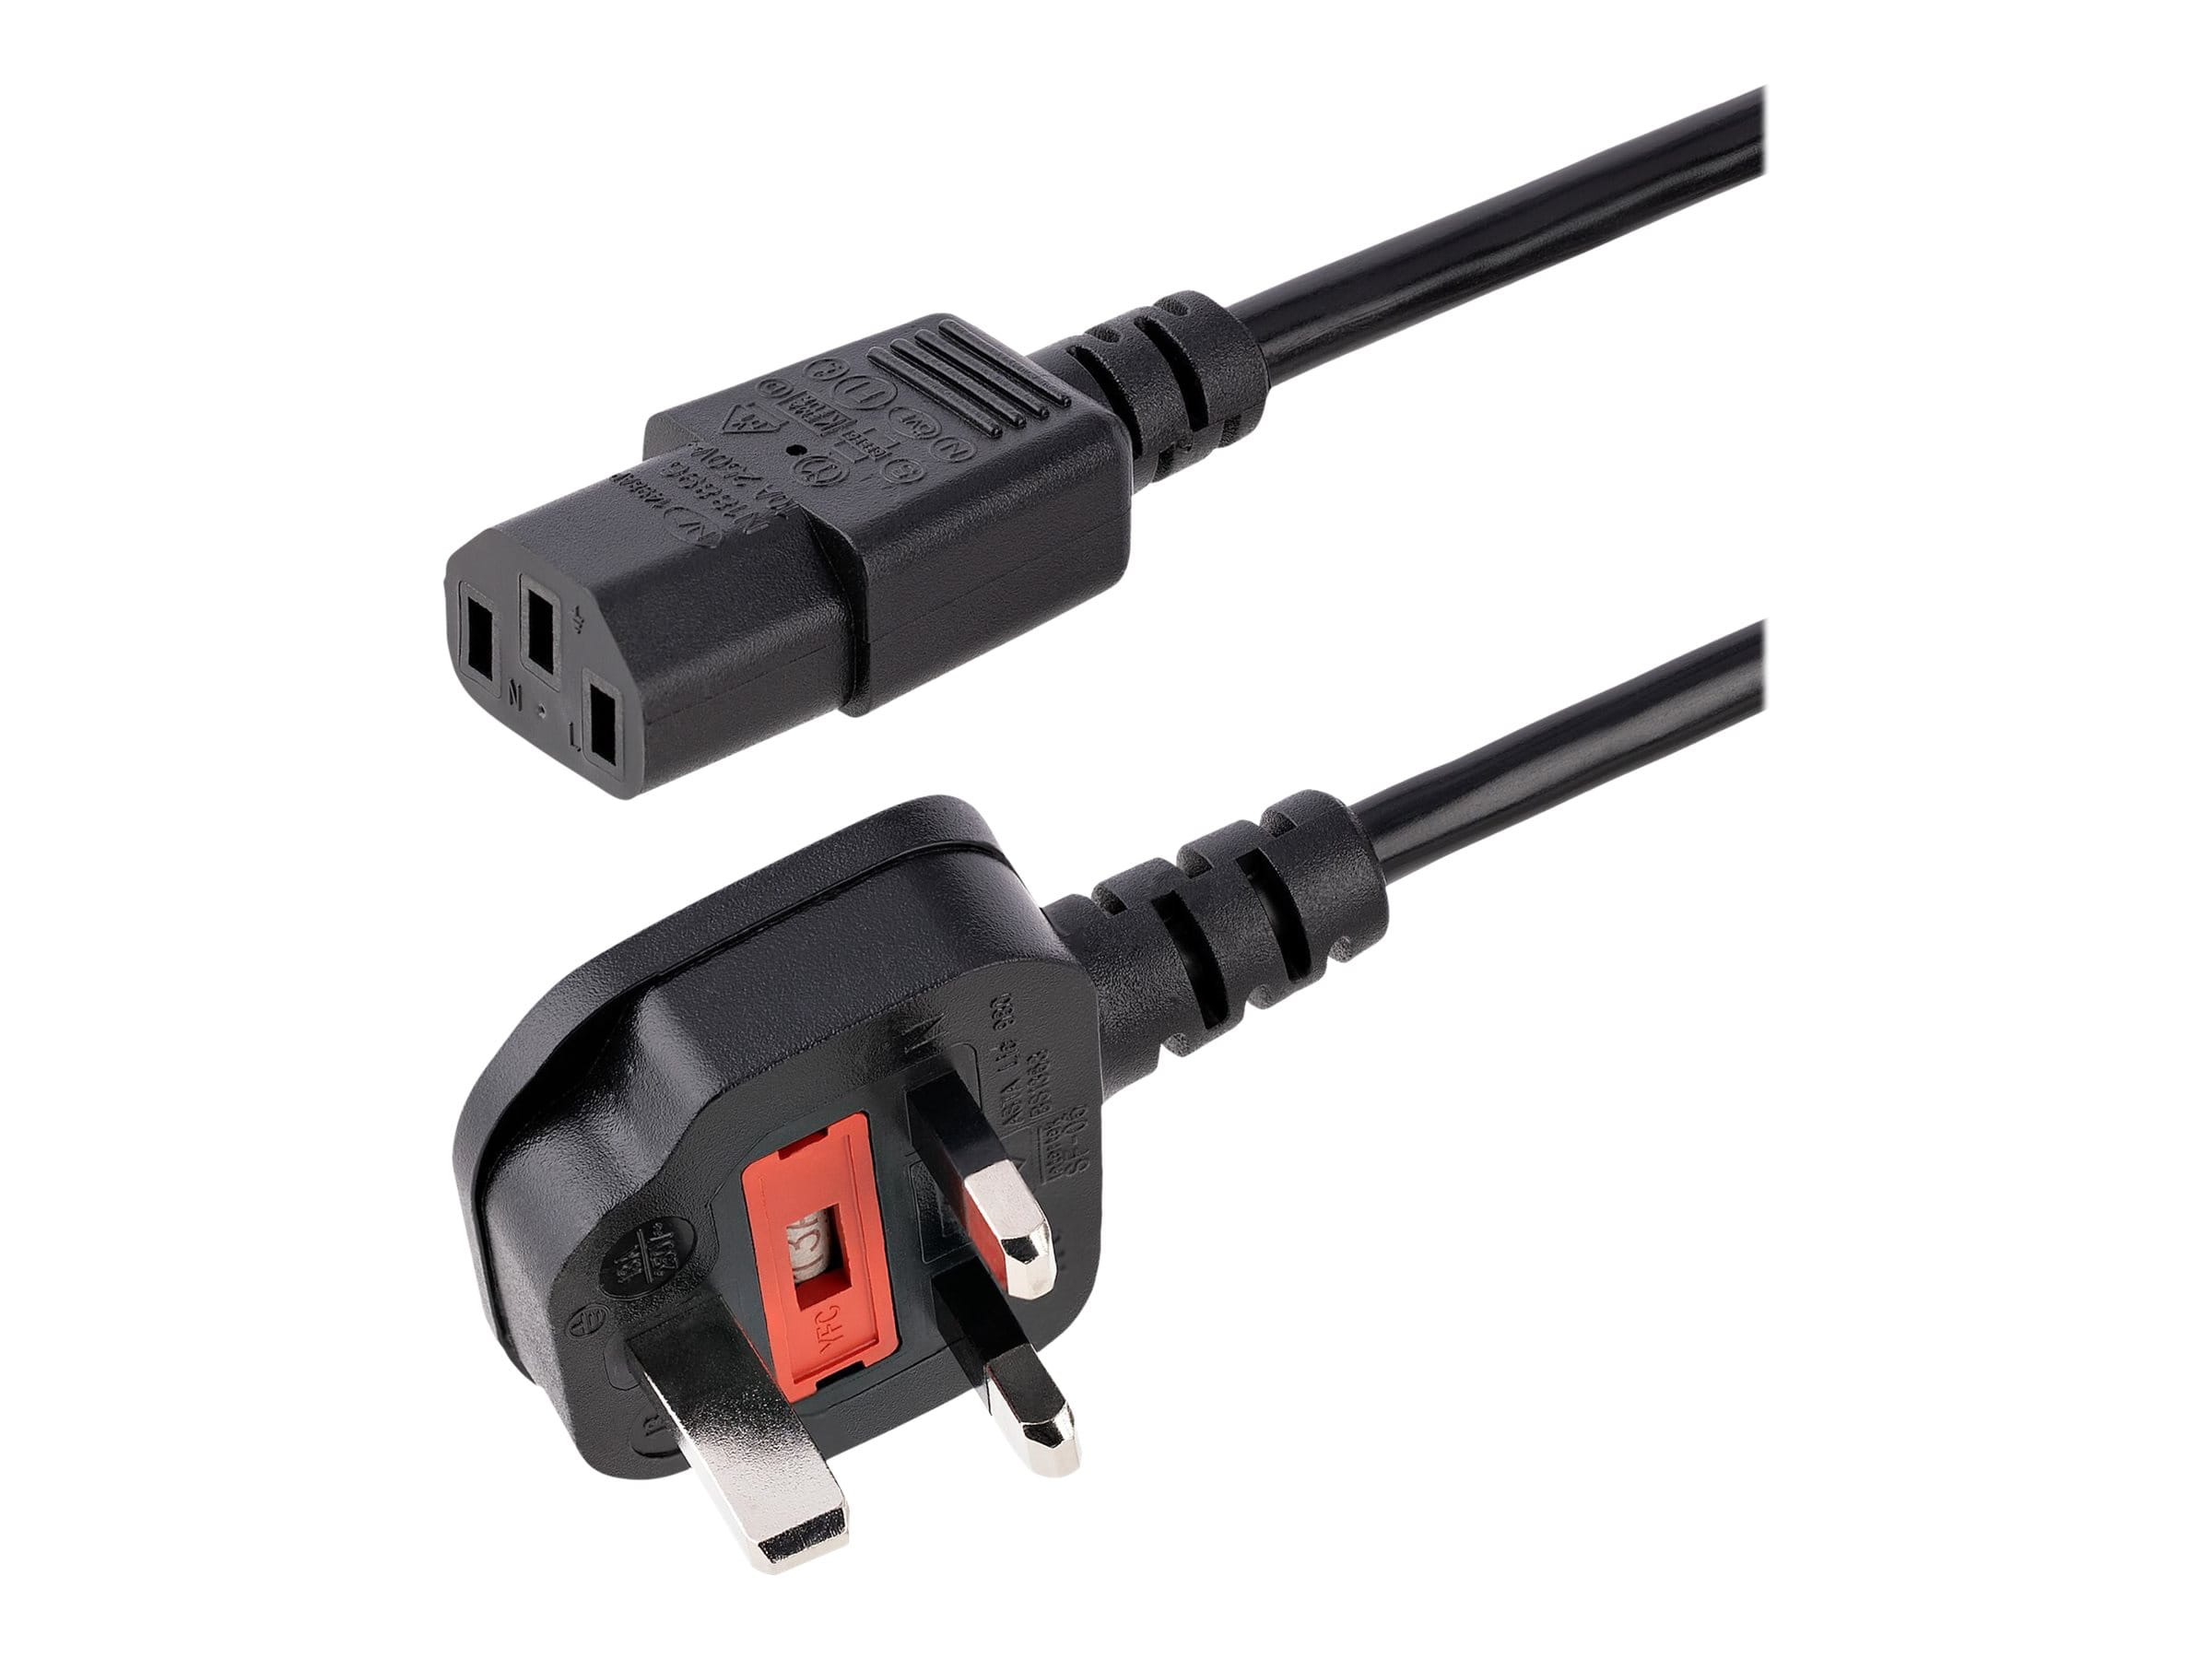 StarTech.com 3ft (1m) UK Computer Power Cable, BS 1363 to C13 Power Cord, 18AWG, 10A 250V, Black Replacement AC Power Cord, Monitor Power Cable, BS 1363 to IEC 60320 C13 Kettle Lead - PC Power Supply Cable (BS13U-1M-POWER-LEAD)